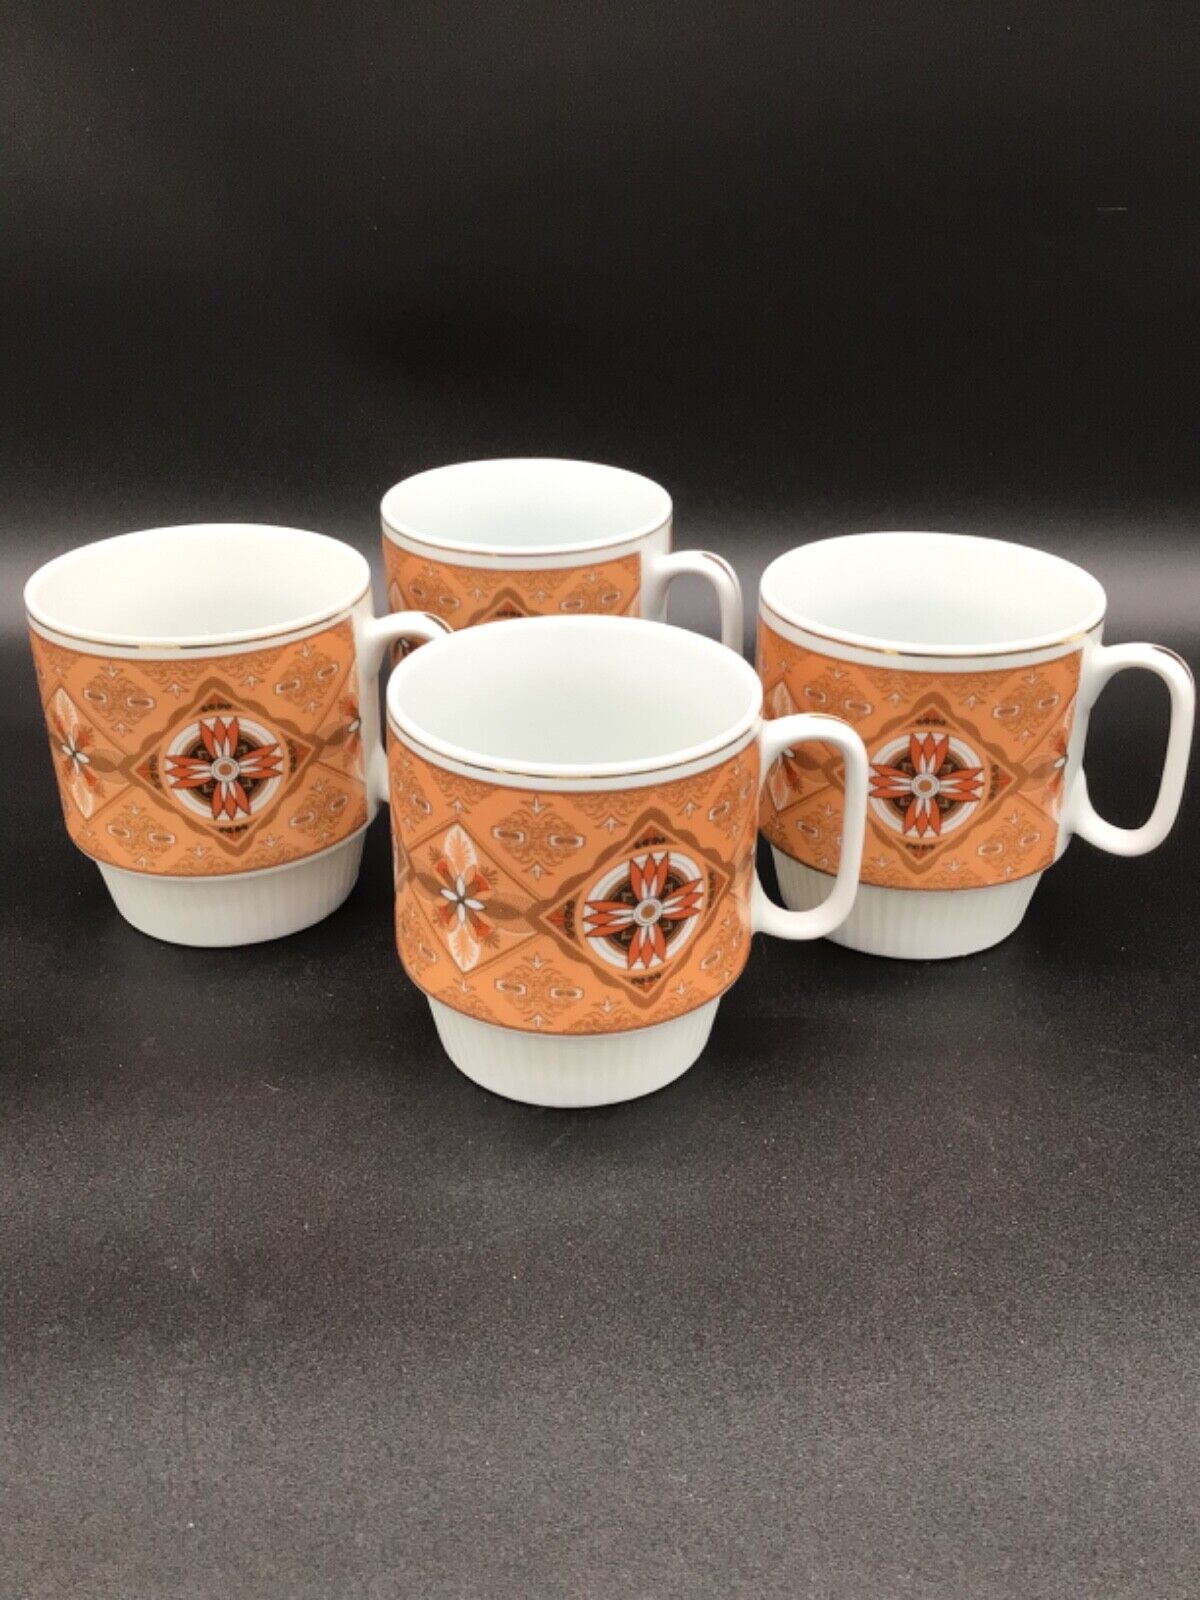 Lot of 4 Vintage Mod Stacking Coffee Cups Orange & Brown Boho Chic